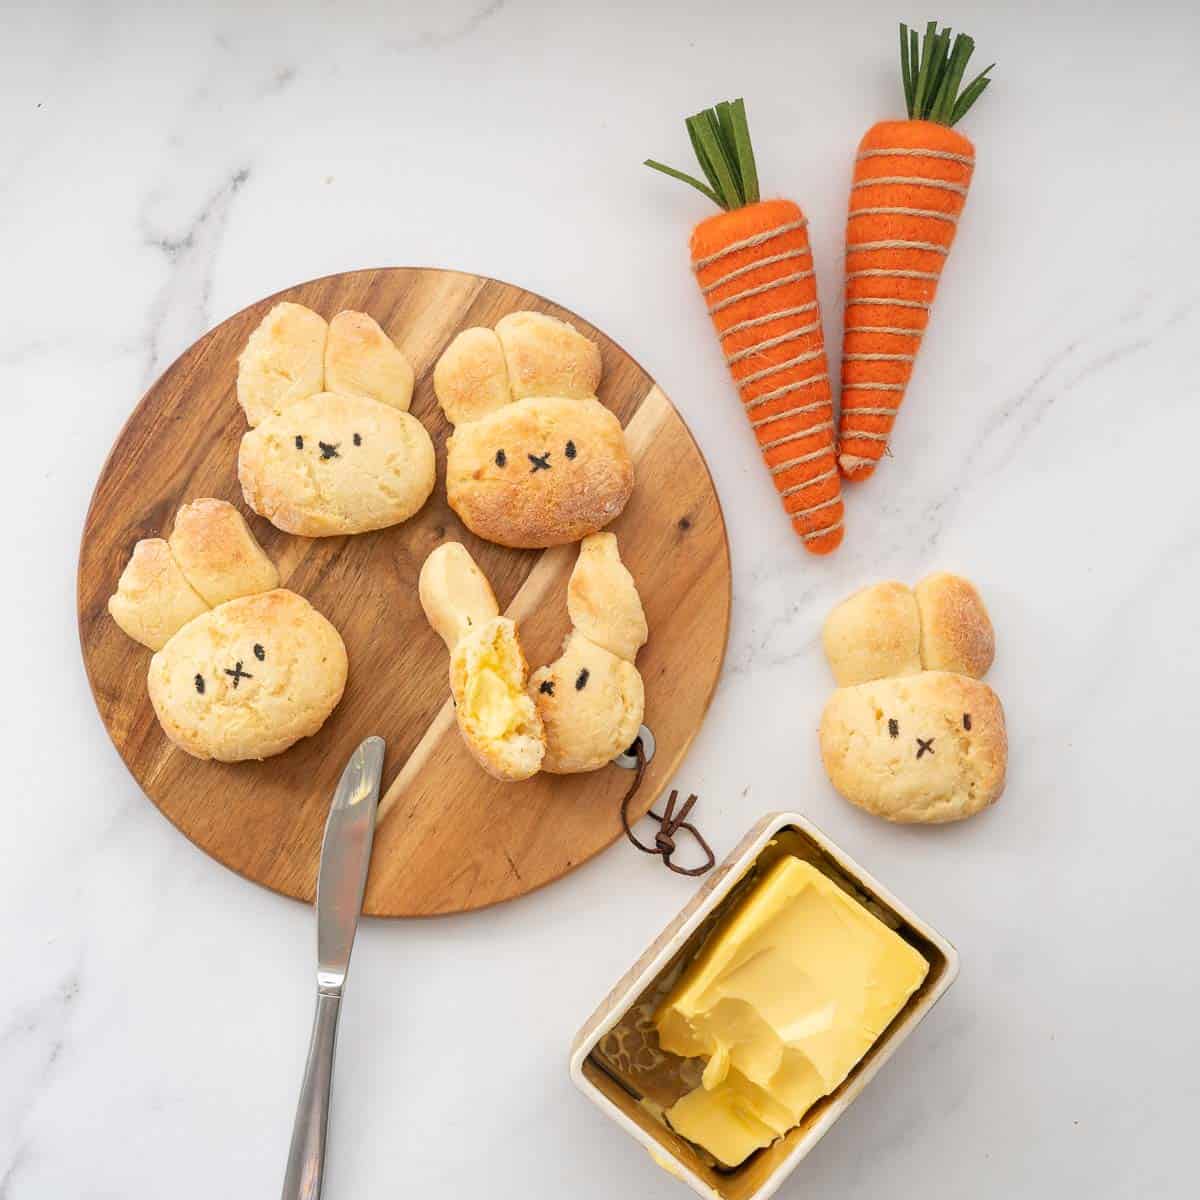 Four bunny shaped bread rolls on a round wooden board, one split in half and buttered.